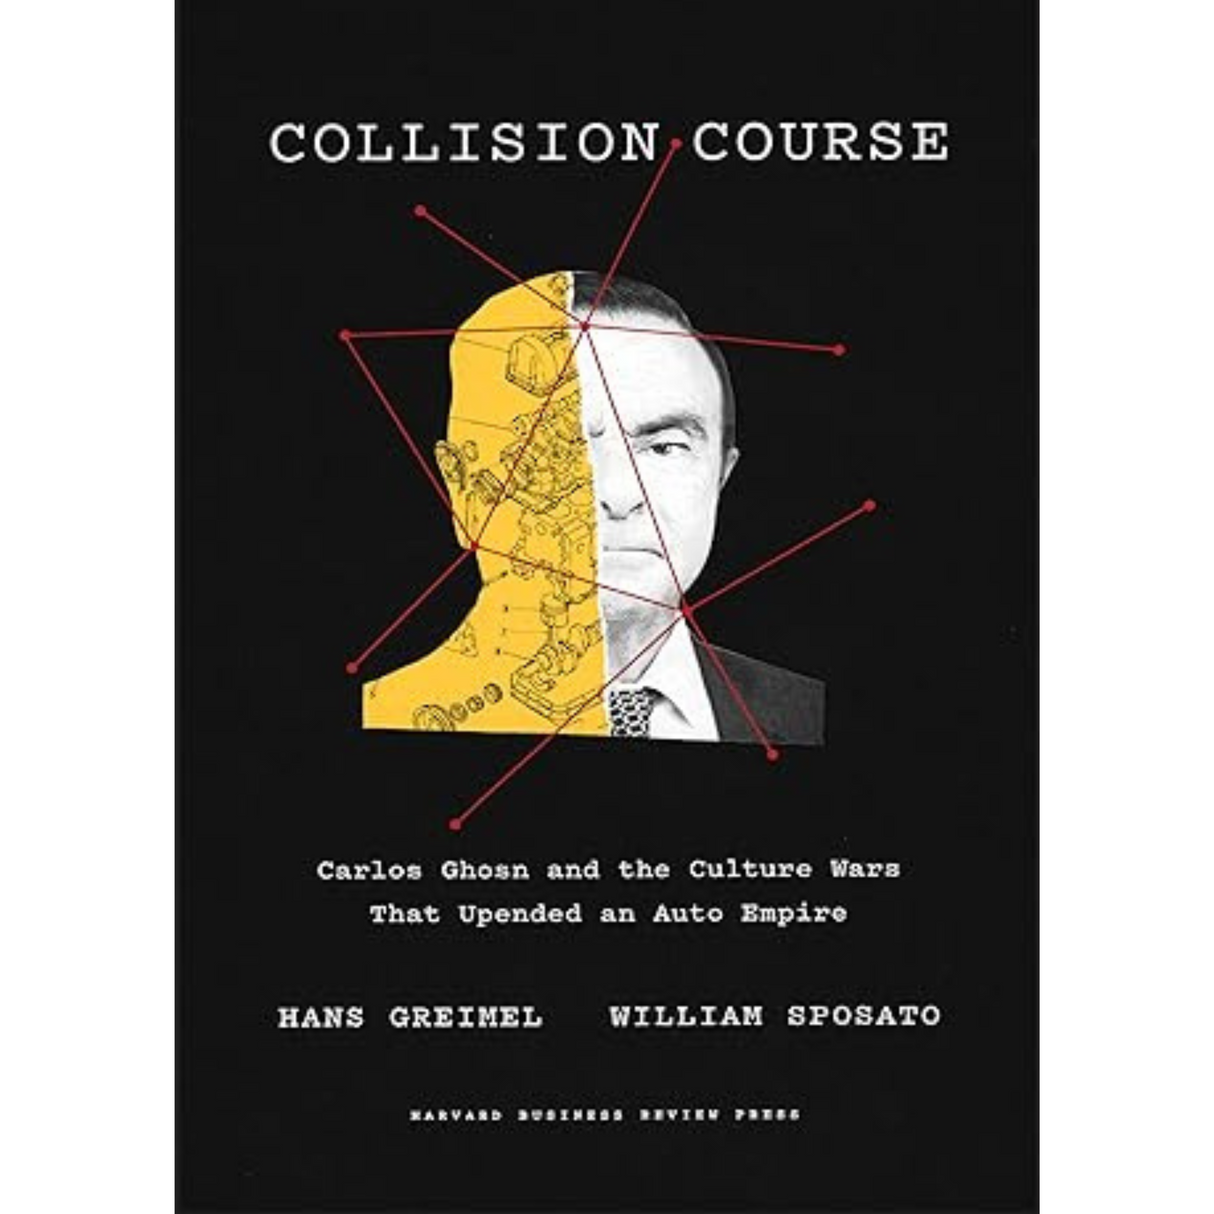 Collision Course: Carlos Ghosn and the Culture Wars That Upended an Auto Empire Hardcover – 22 Jun. 2021